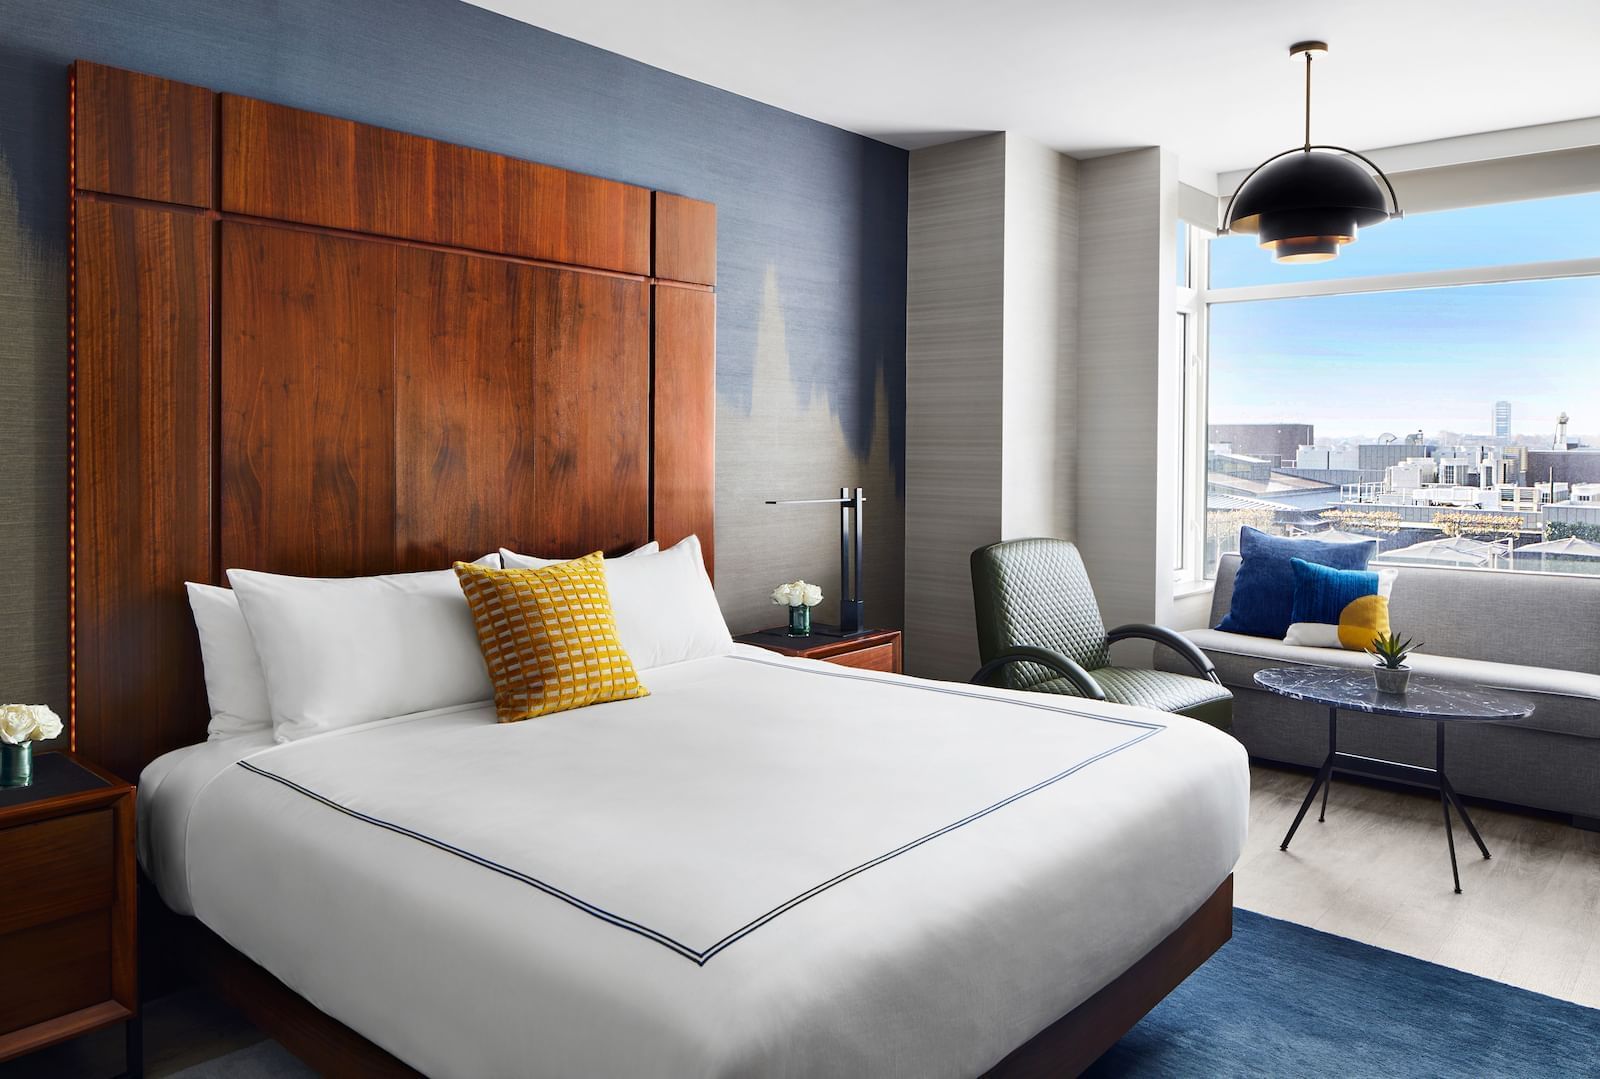 Gansevoort Meatpacking Grand Deluxe King Guestroom with Hudson River views, sofa bed, florals and a seating area